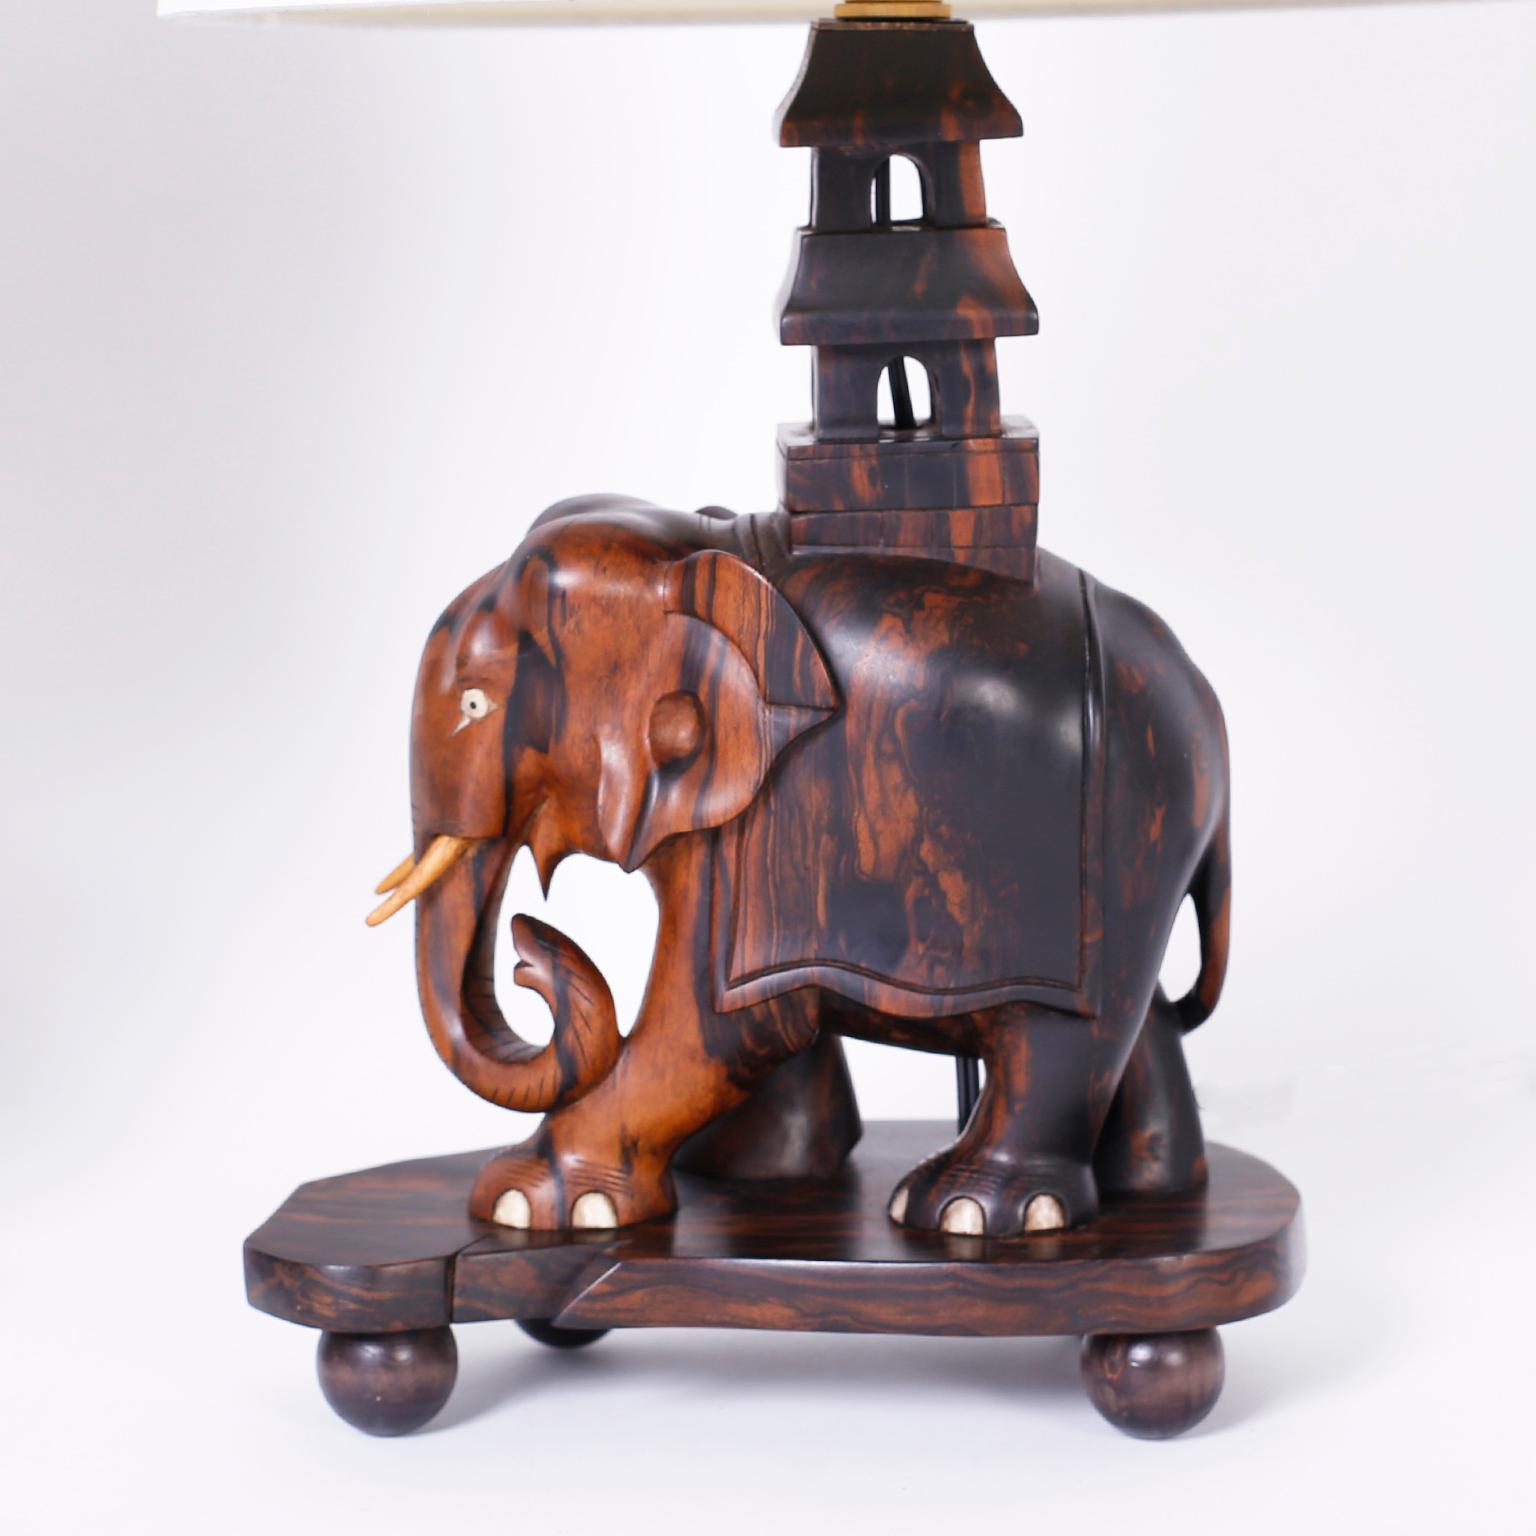 Exotic pair of antique table lamps carved in Coromandel wood with its distinctive dramatic grain depicting an elephant, with bone details, carrying a pagoda like structured walking on a biomorphic base with ball feet.